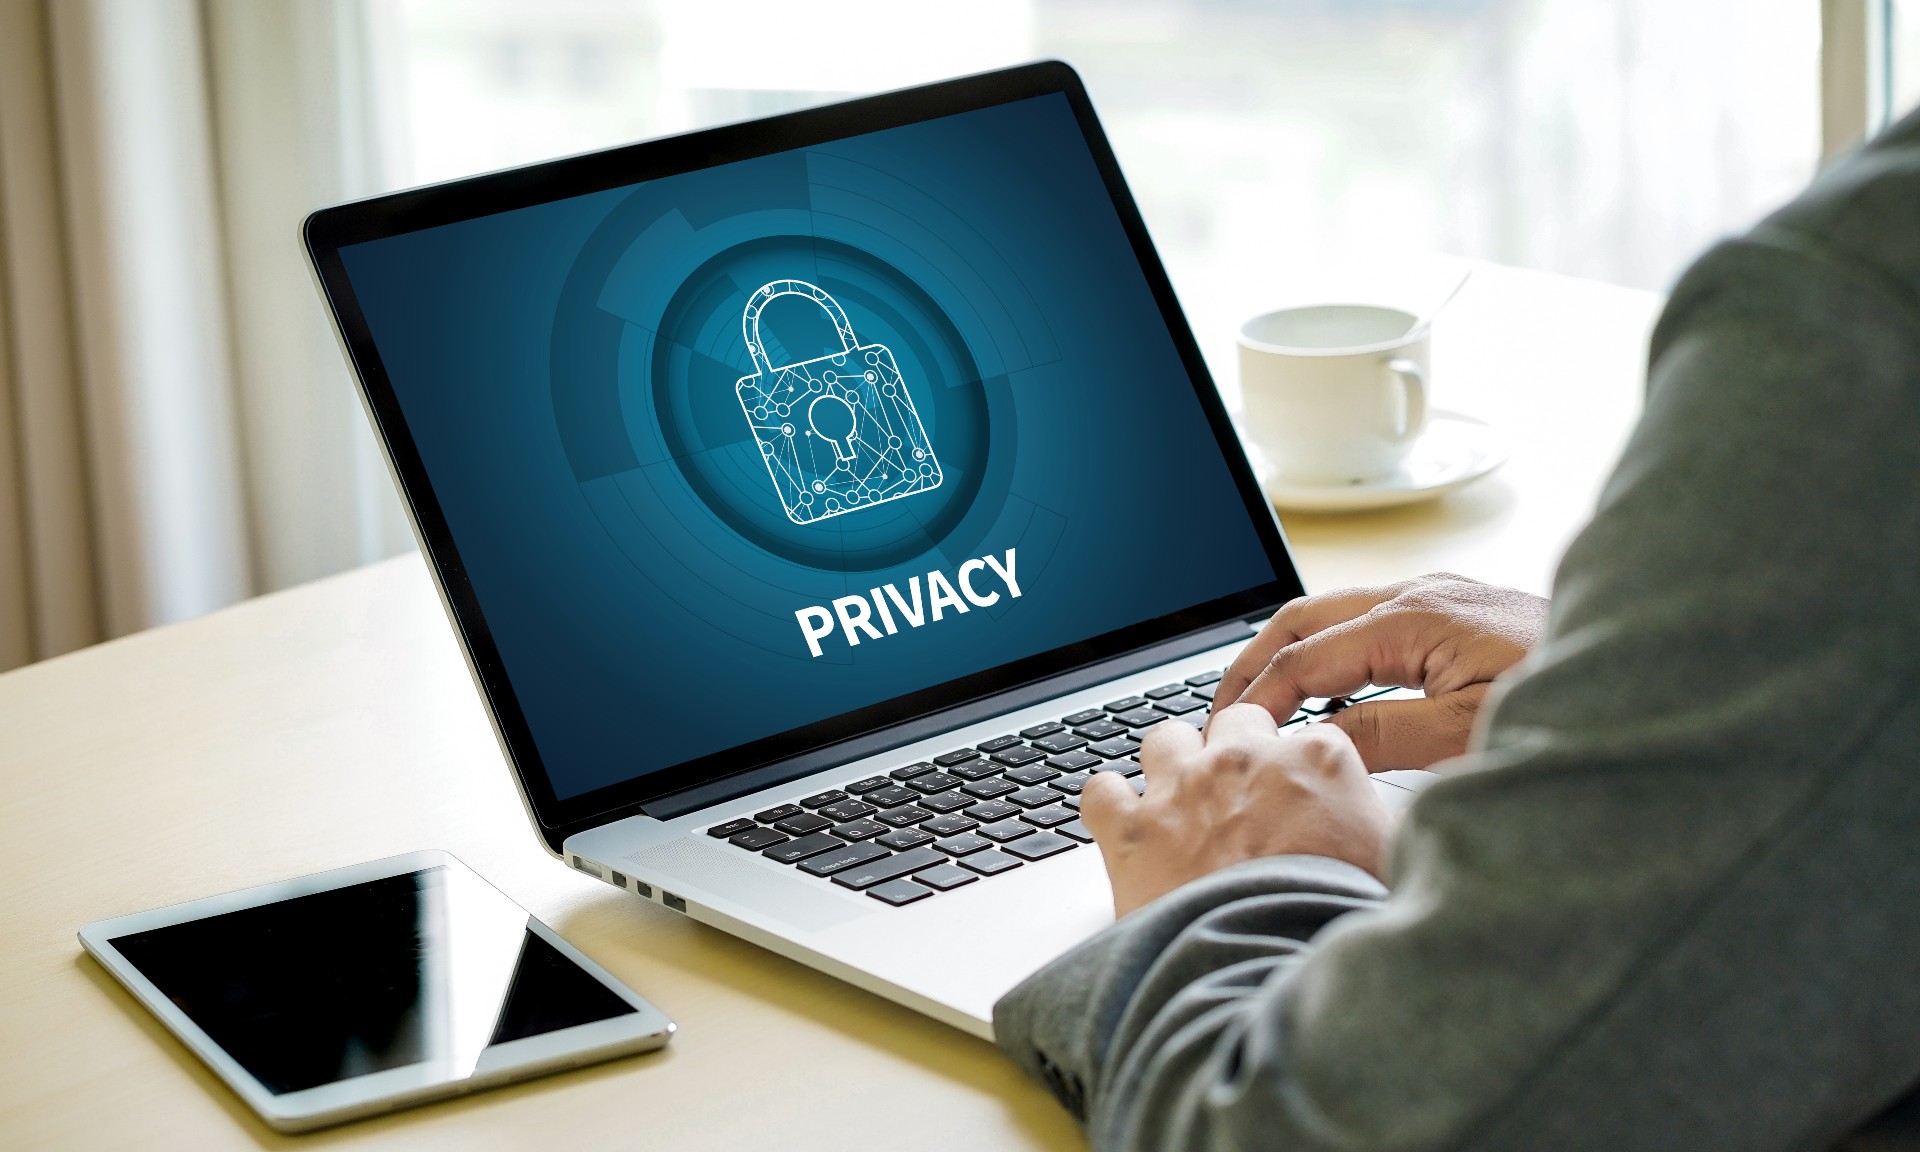 Genetec recognises data privacy day by sharing physical security best practices